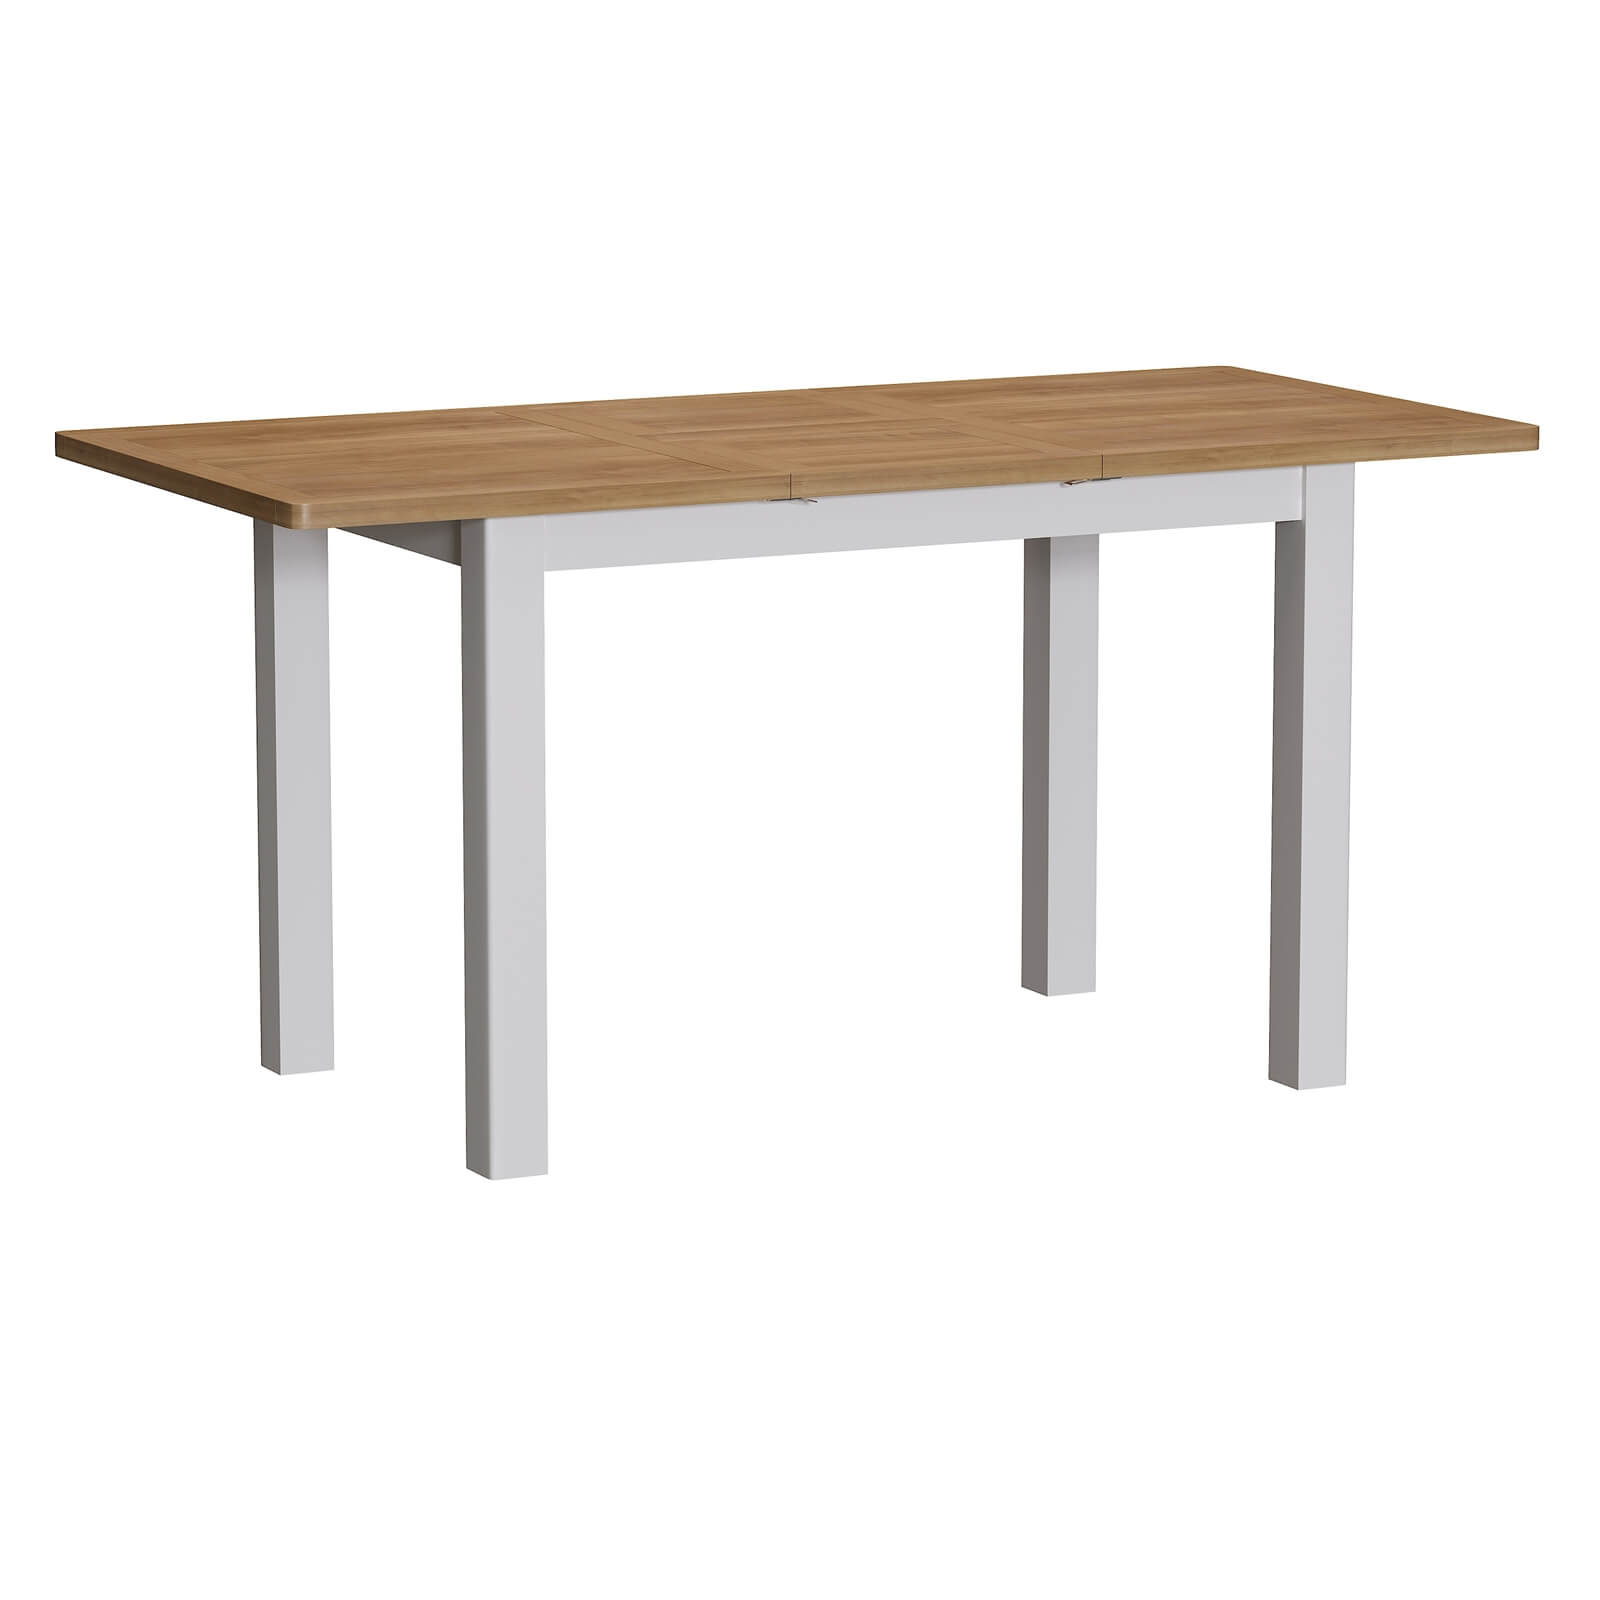 Padstow 1.2m Extending Dining Table - Truffle